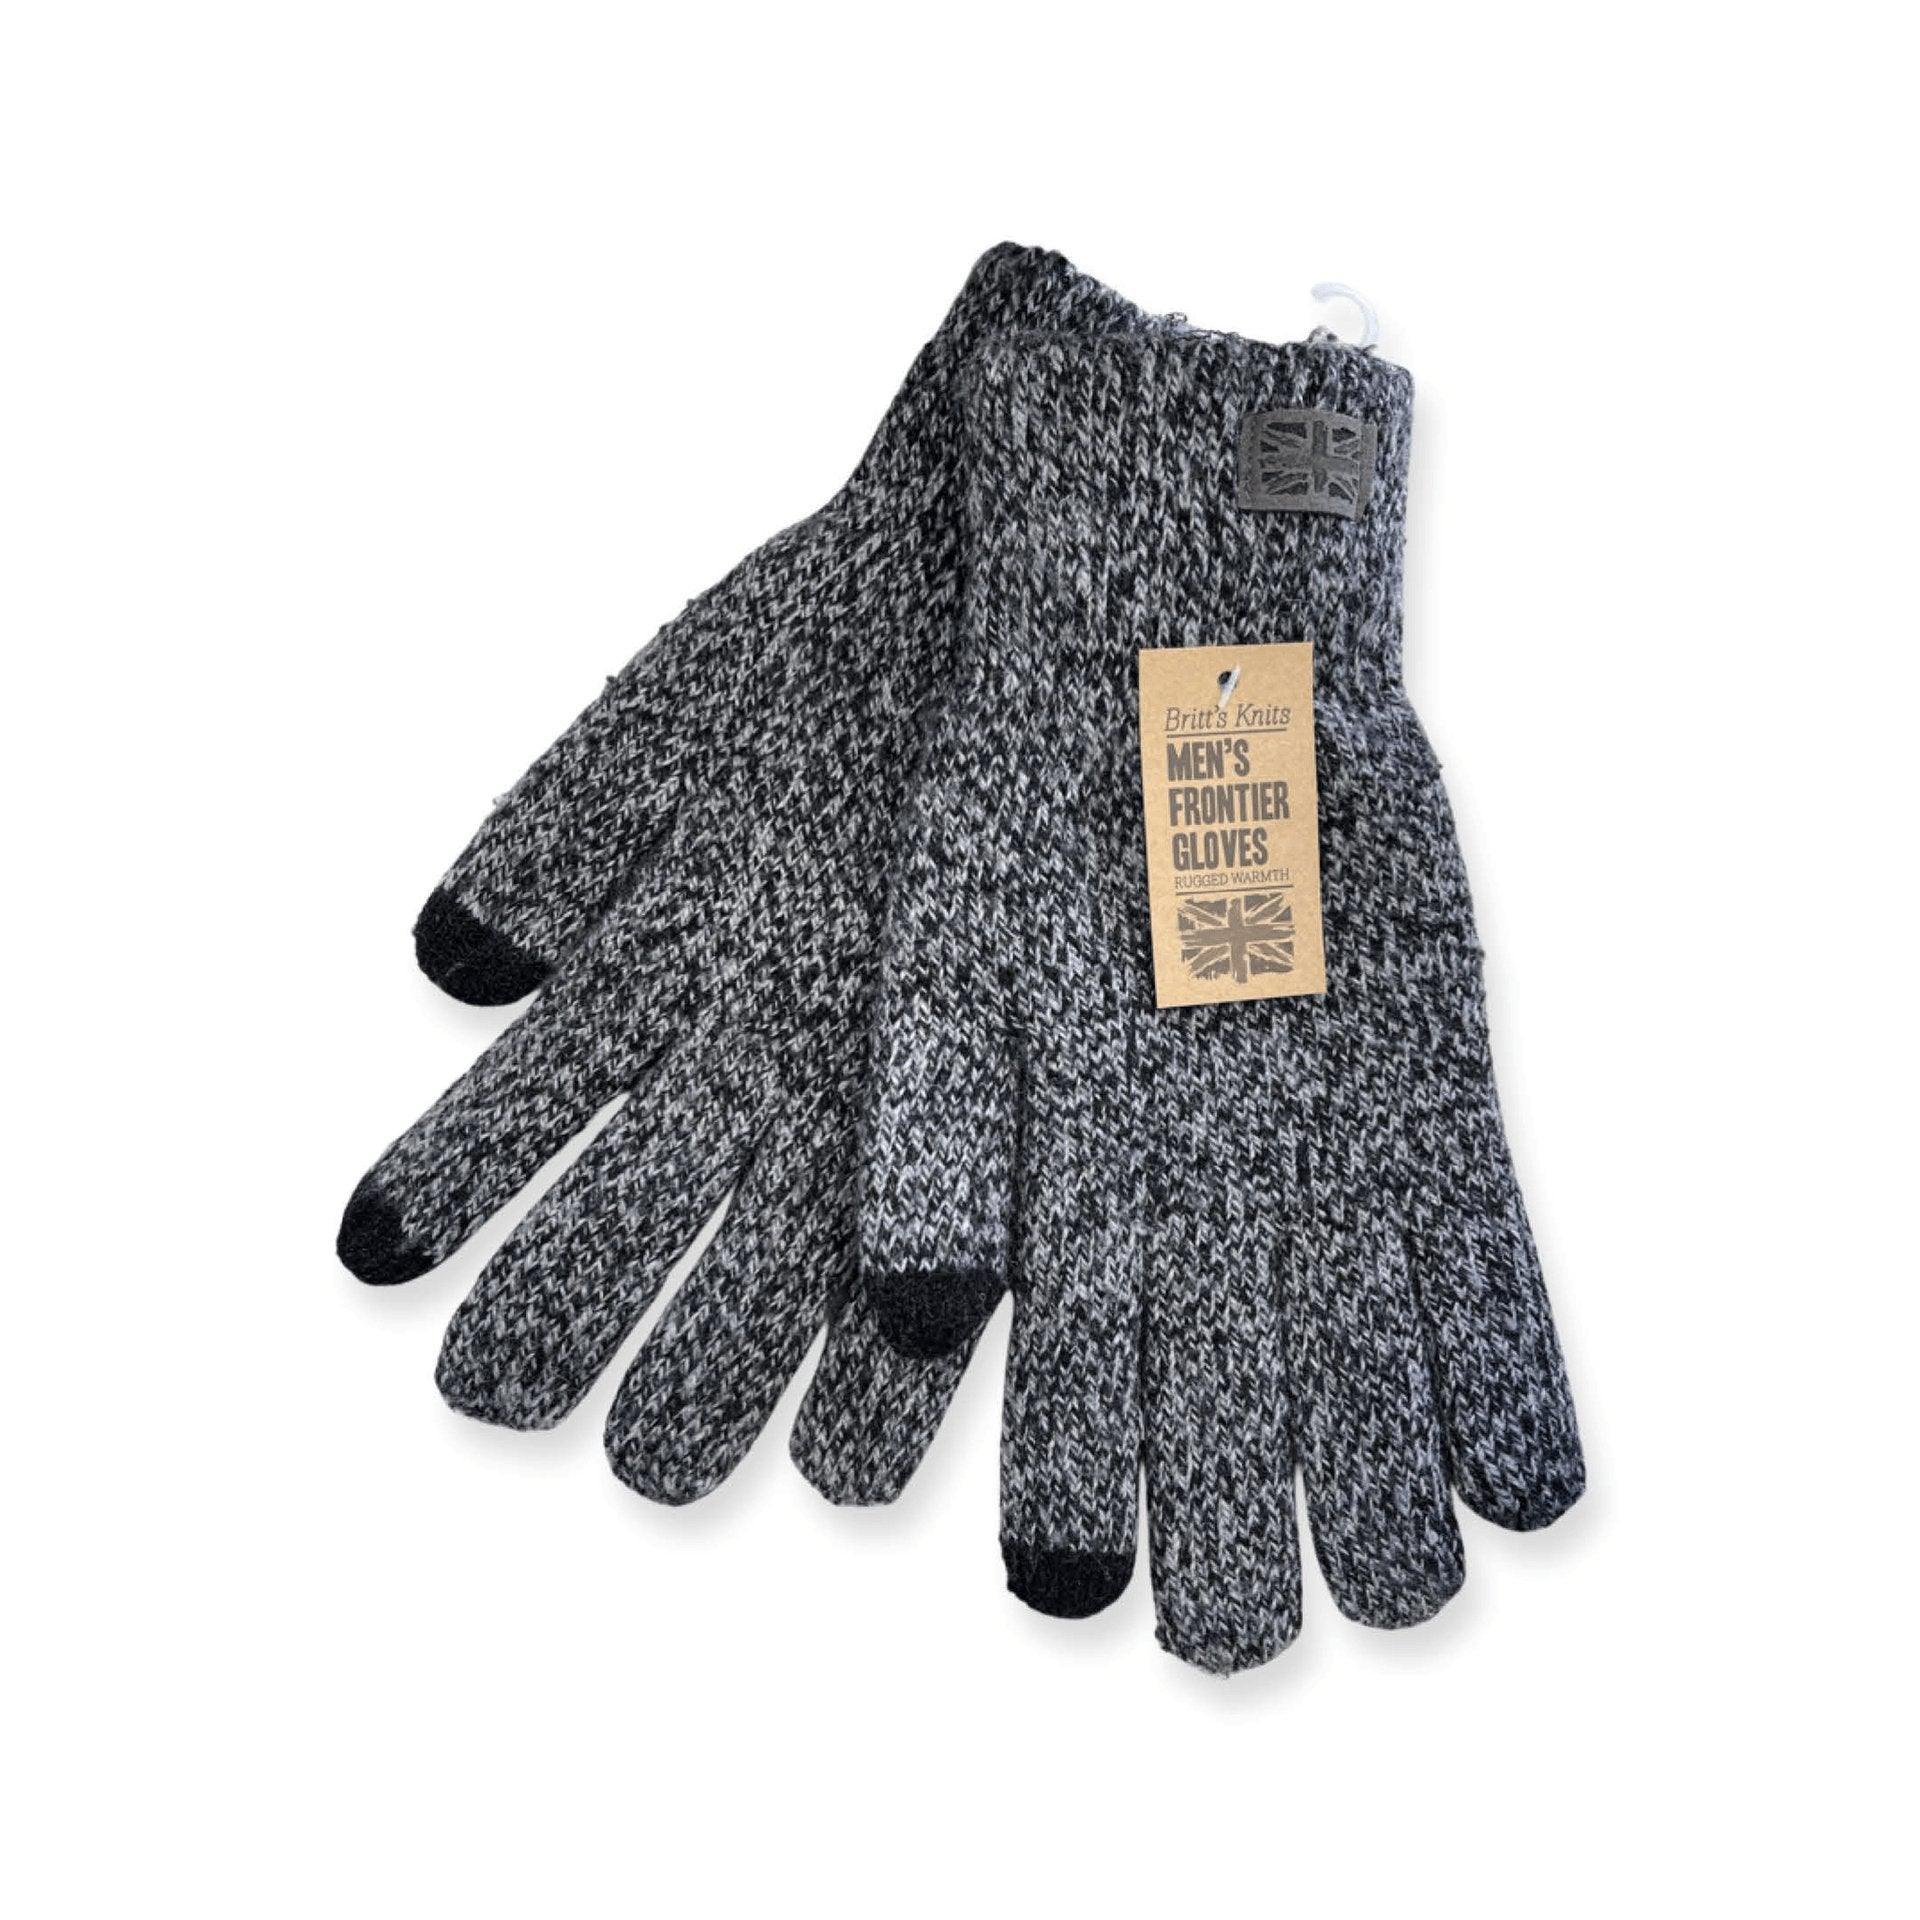 Britt's Knits Men's Frontier Gloves - Sunshine and Grace Gifts